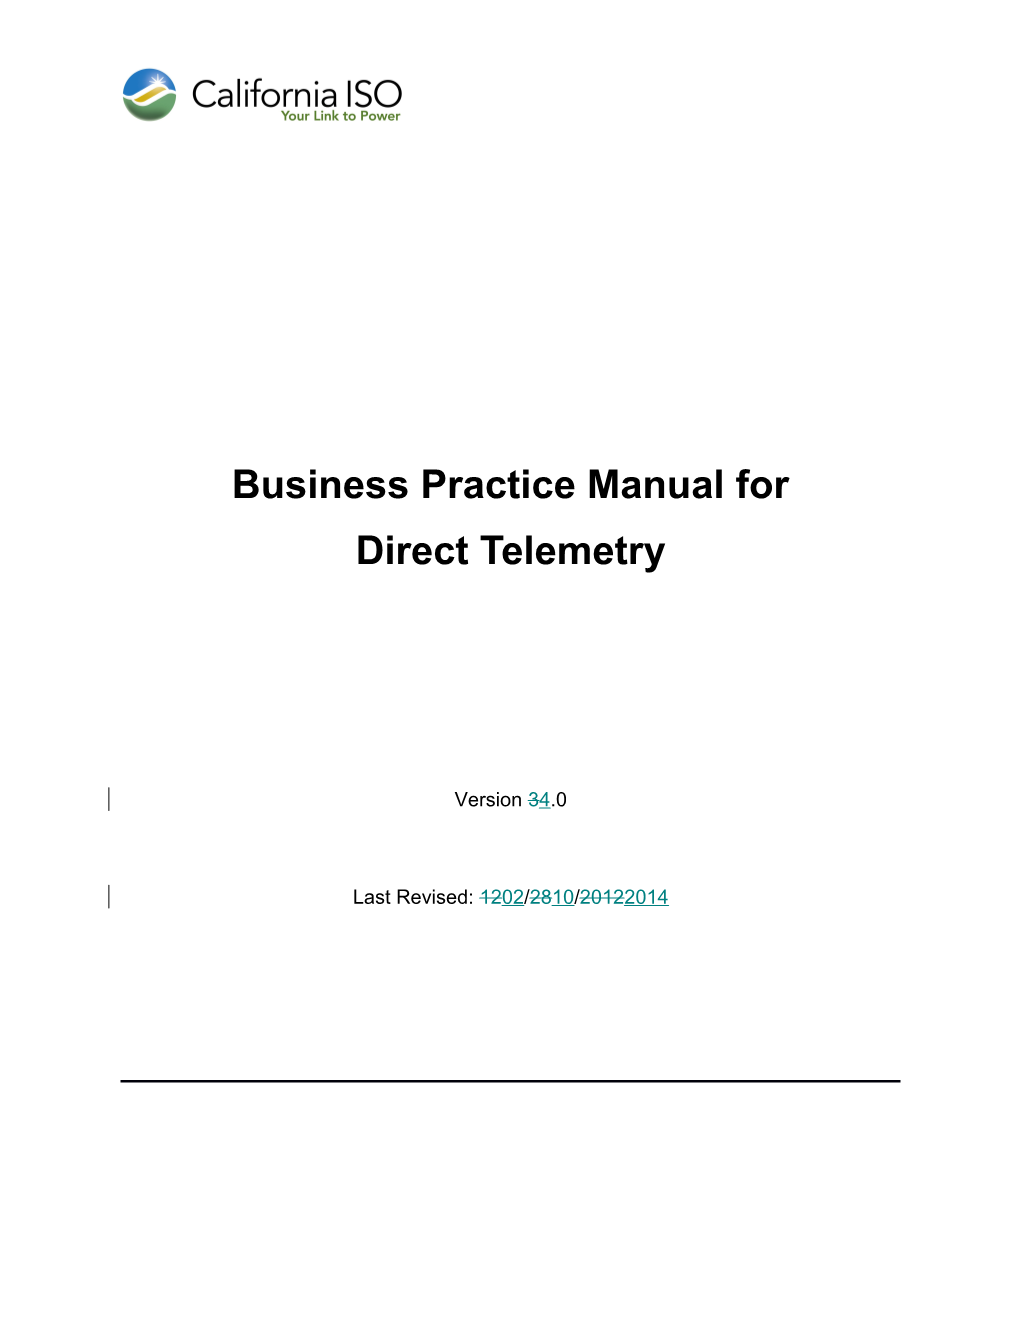 CAISO Business Practice Manualbpm for Direct Telemetry